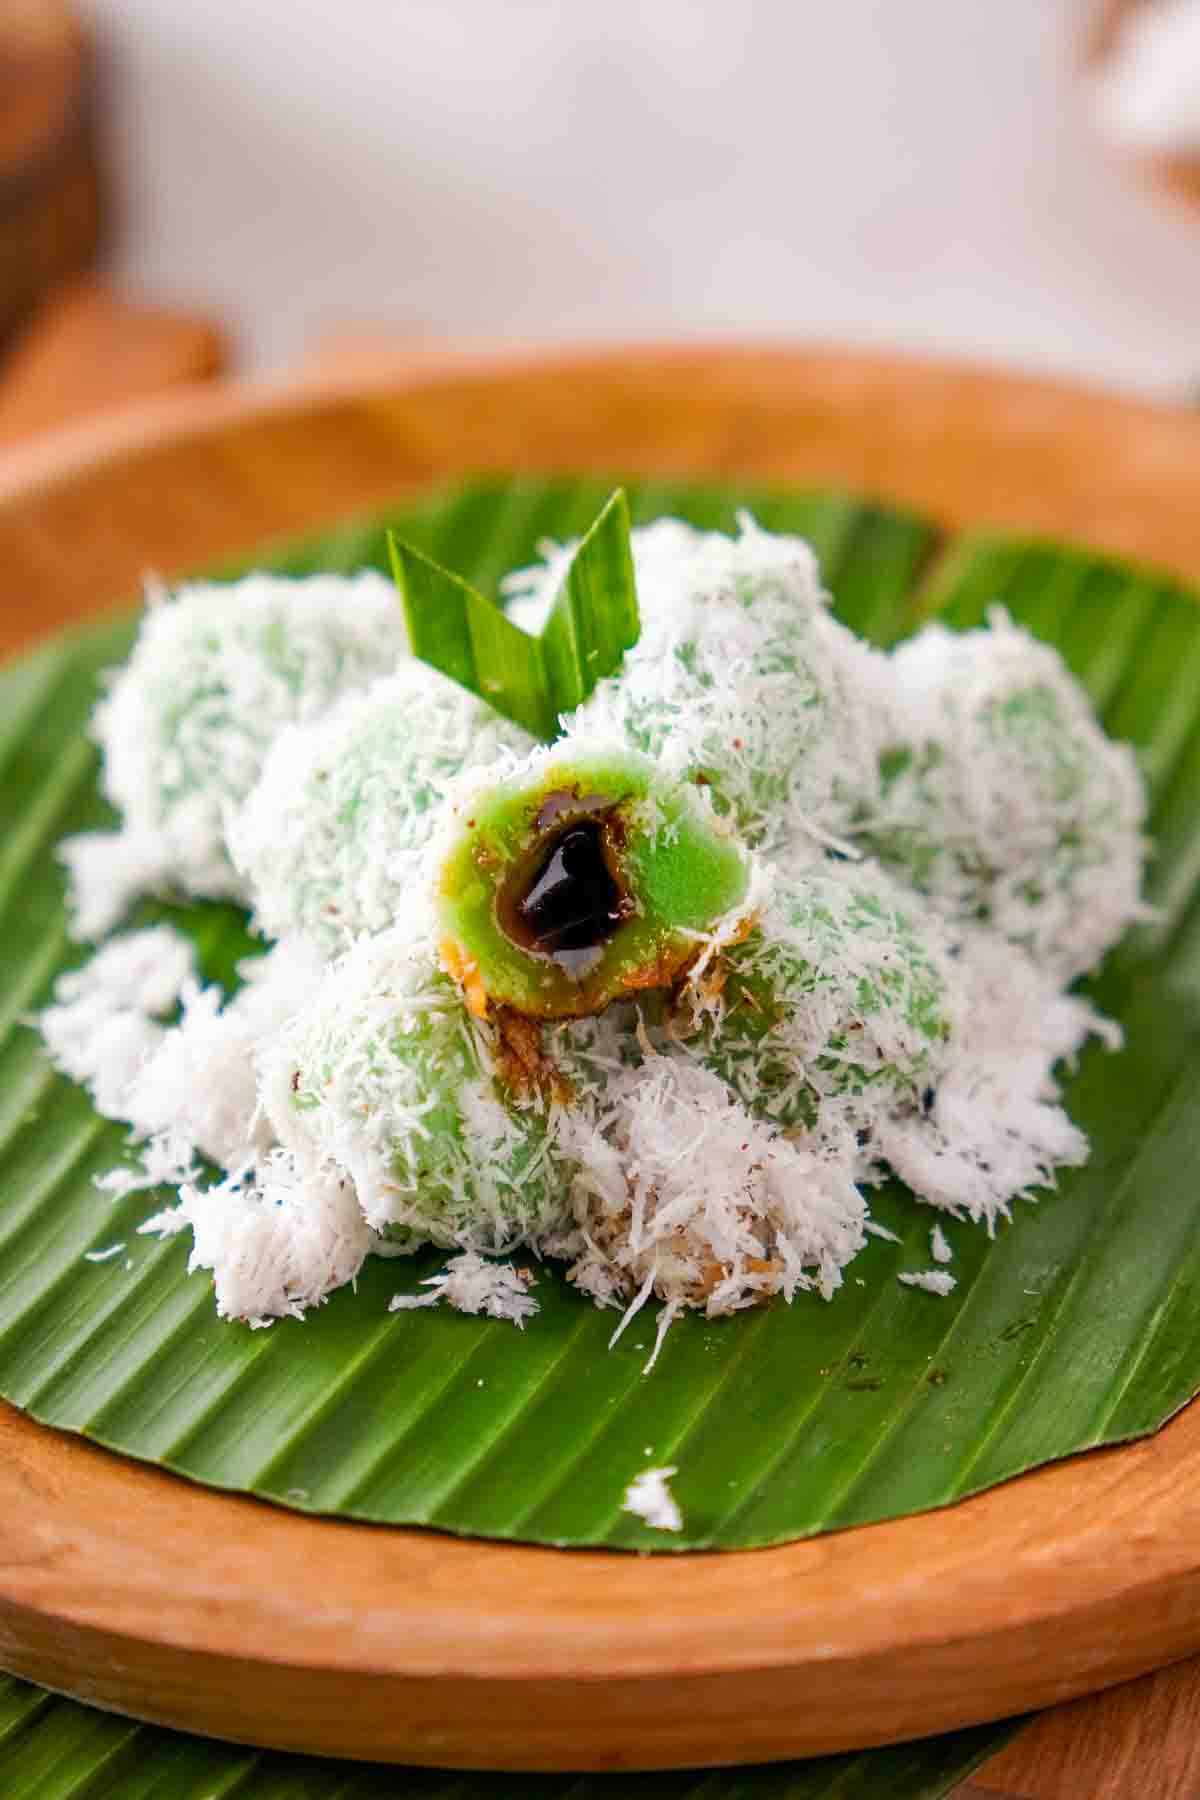 A half-eaten klepon shows the melted palm sugar syrup inside of the green glutinous rice ball.